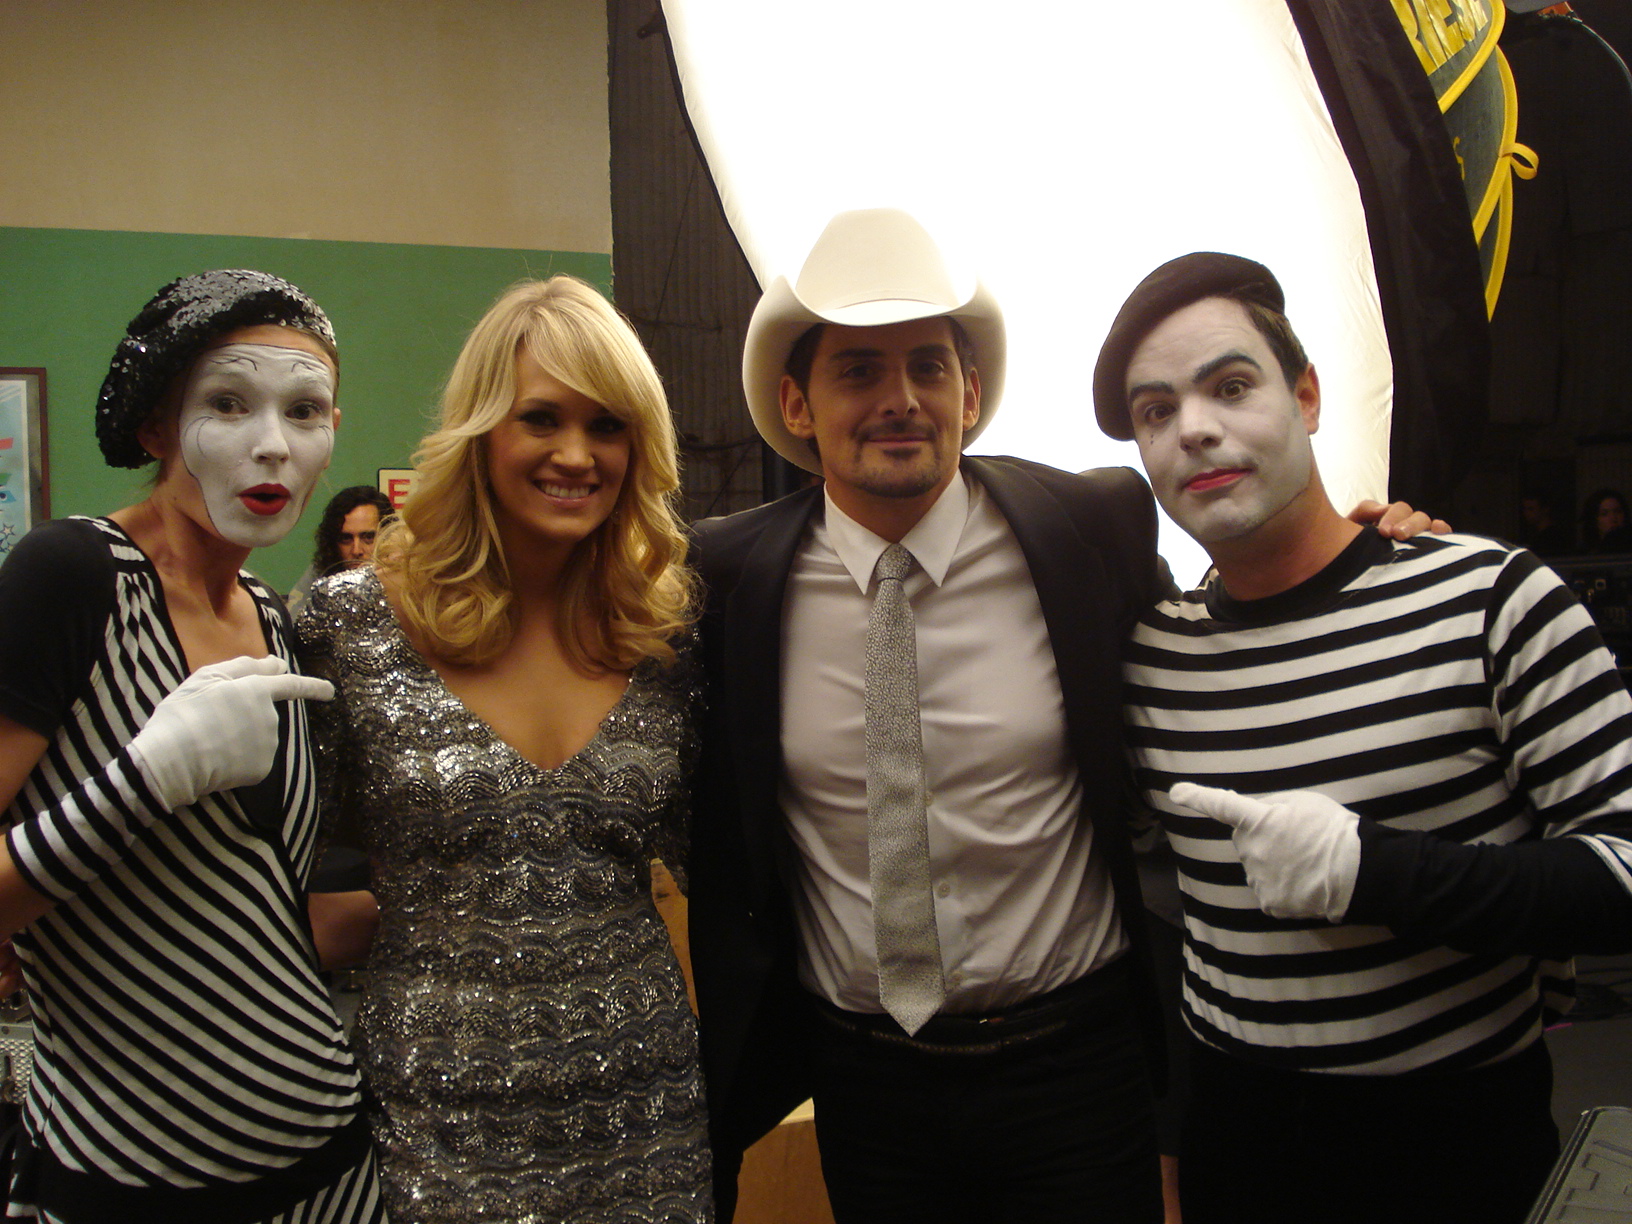 On the set with Brad Paisley, and Carrie Underwood